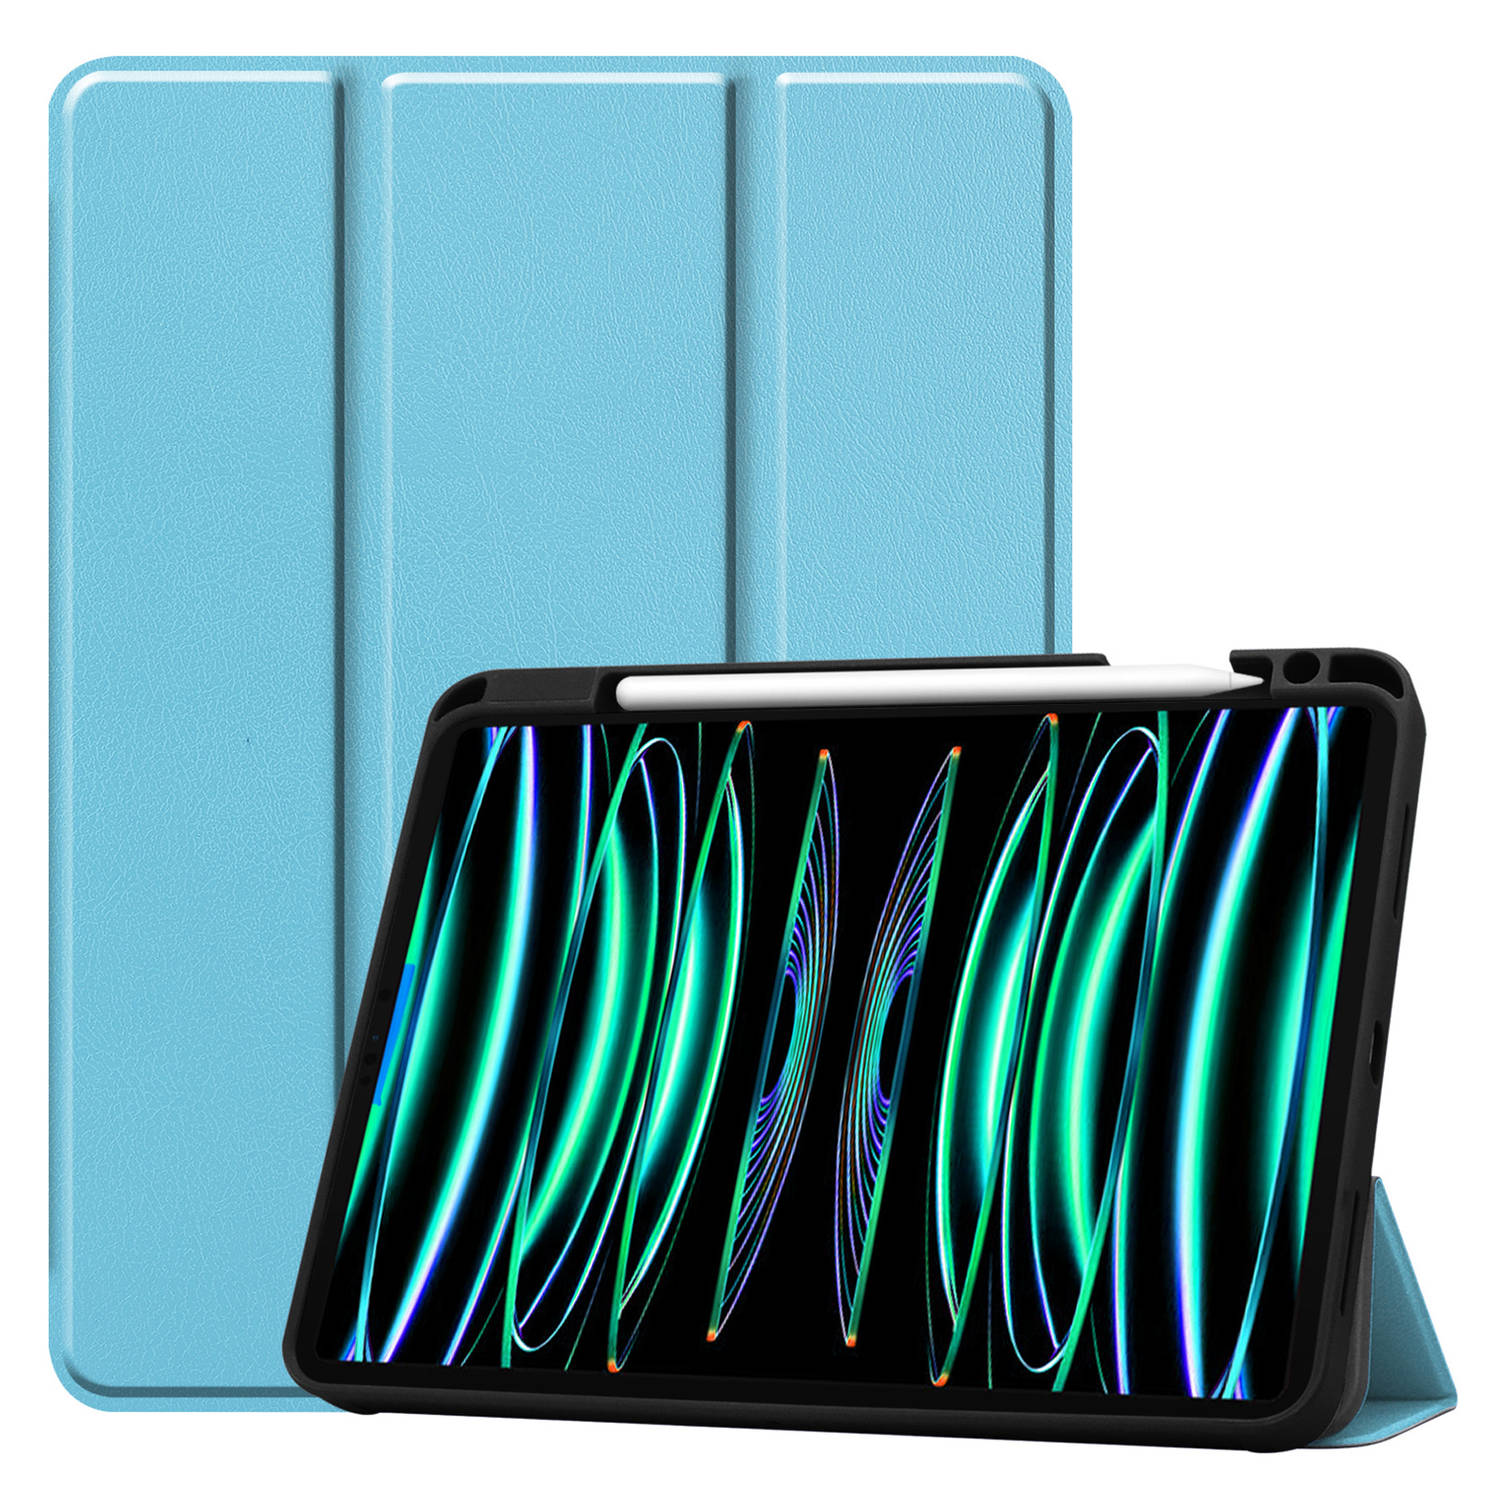 Basey Ipad Pro 2021 11 Inch Hoes Case Hoesje Licht Blauw Uitsparing Apple Pencil